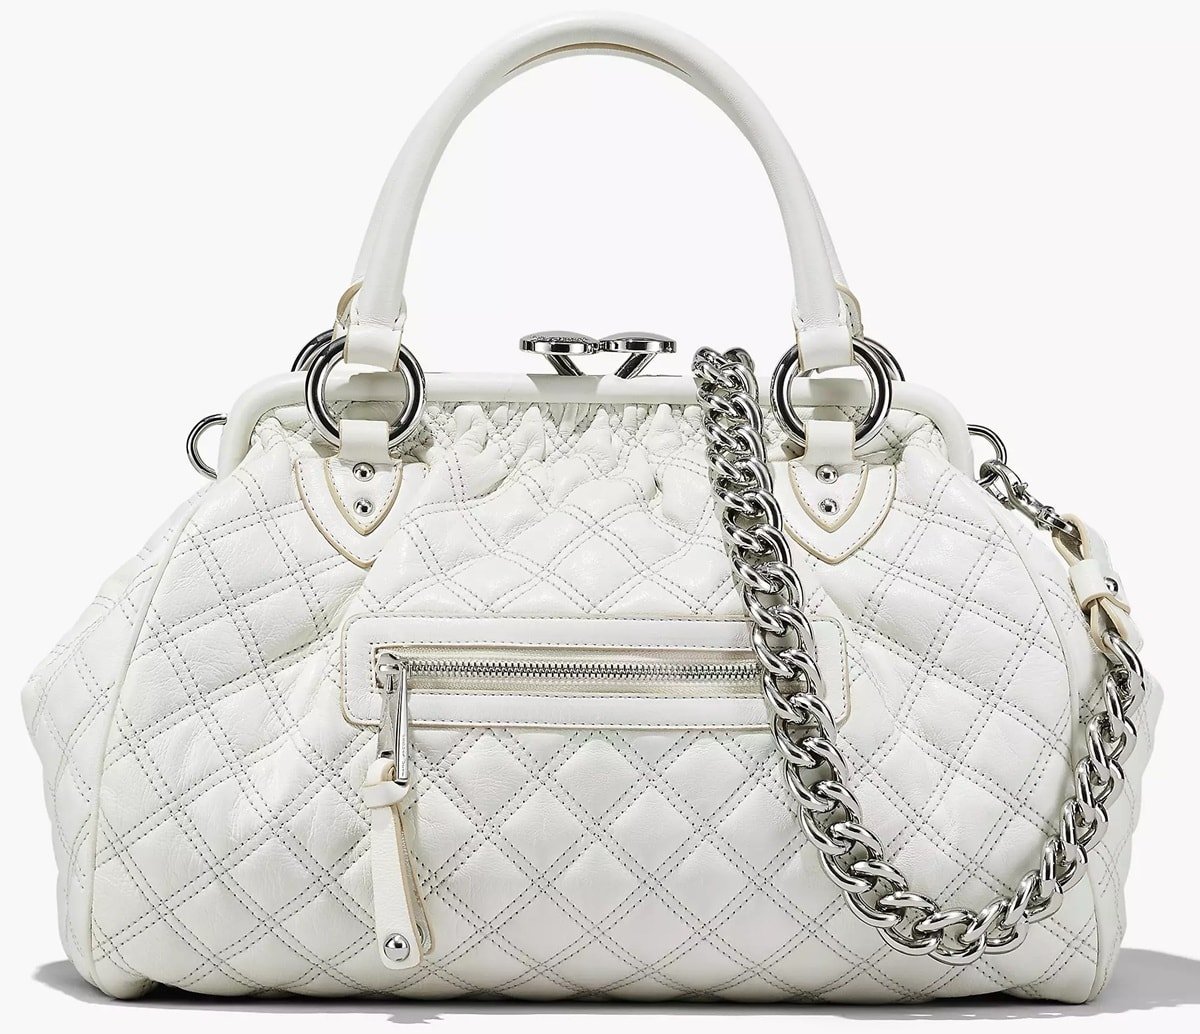 One of the most expensive Marc Jacobs handbags is a re-edition of its iconic Stam Bag that costs $1,495